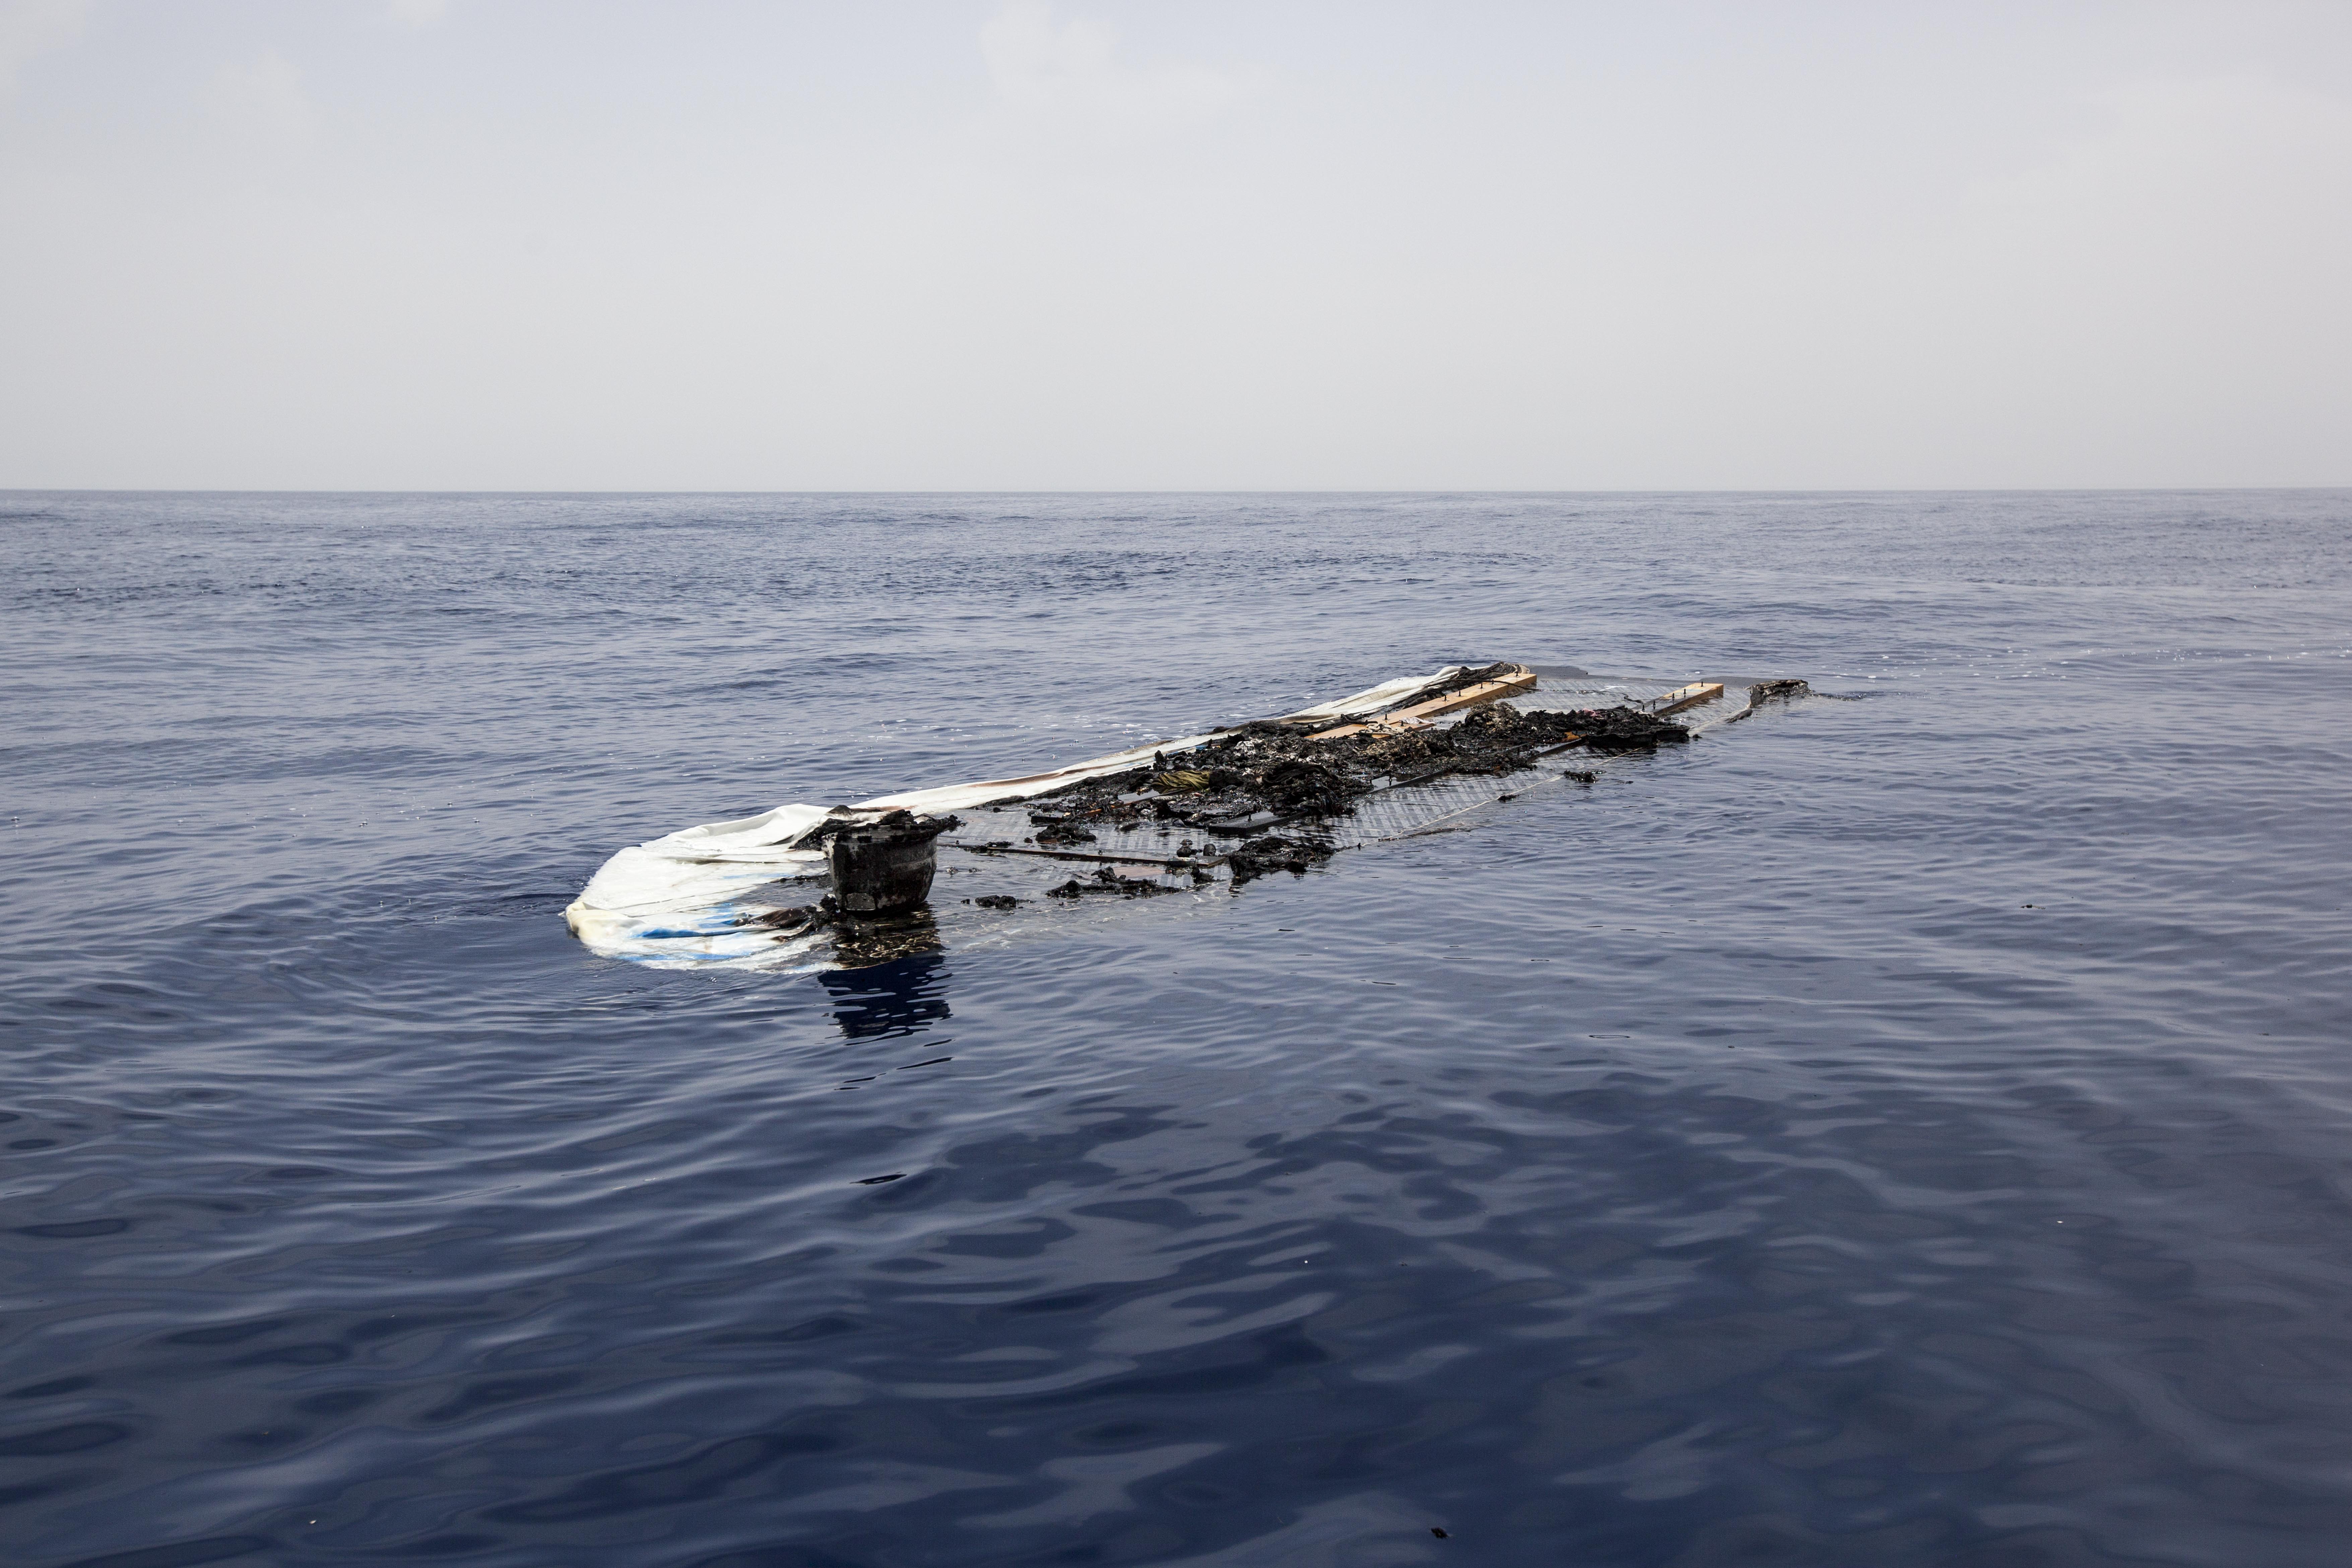 What remains of a rubber boat floats in the Mediterranean Sea after having been set ablaze.